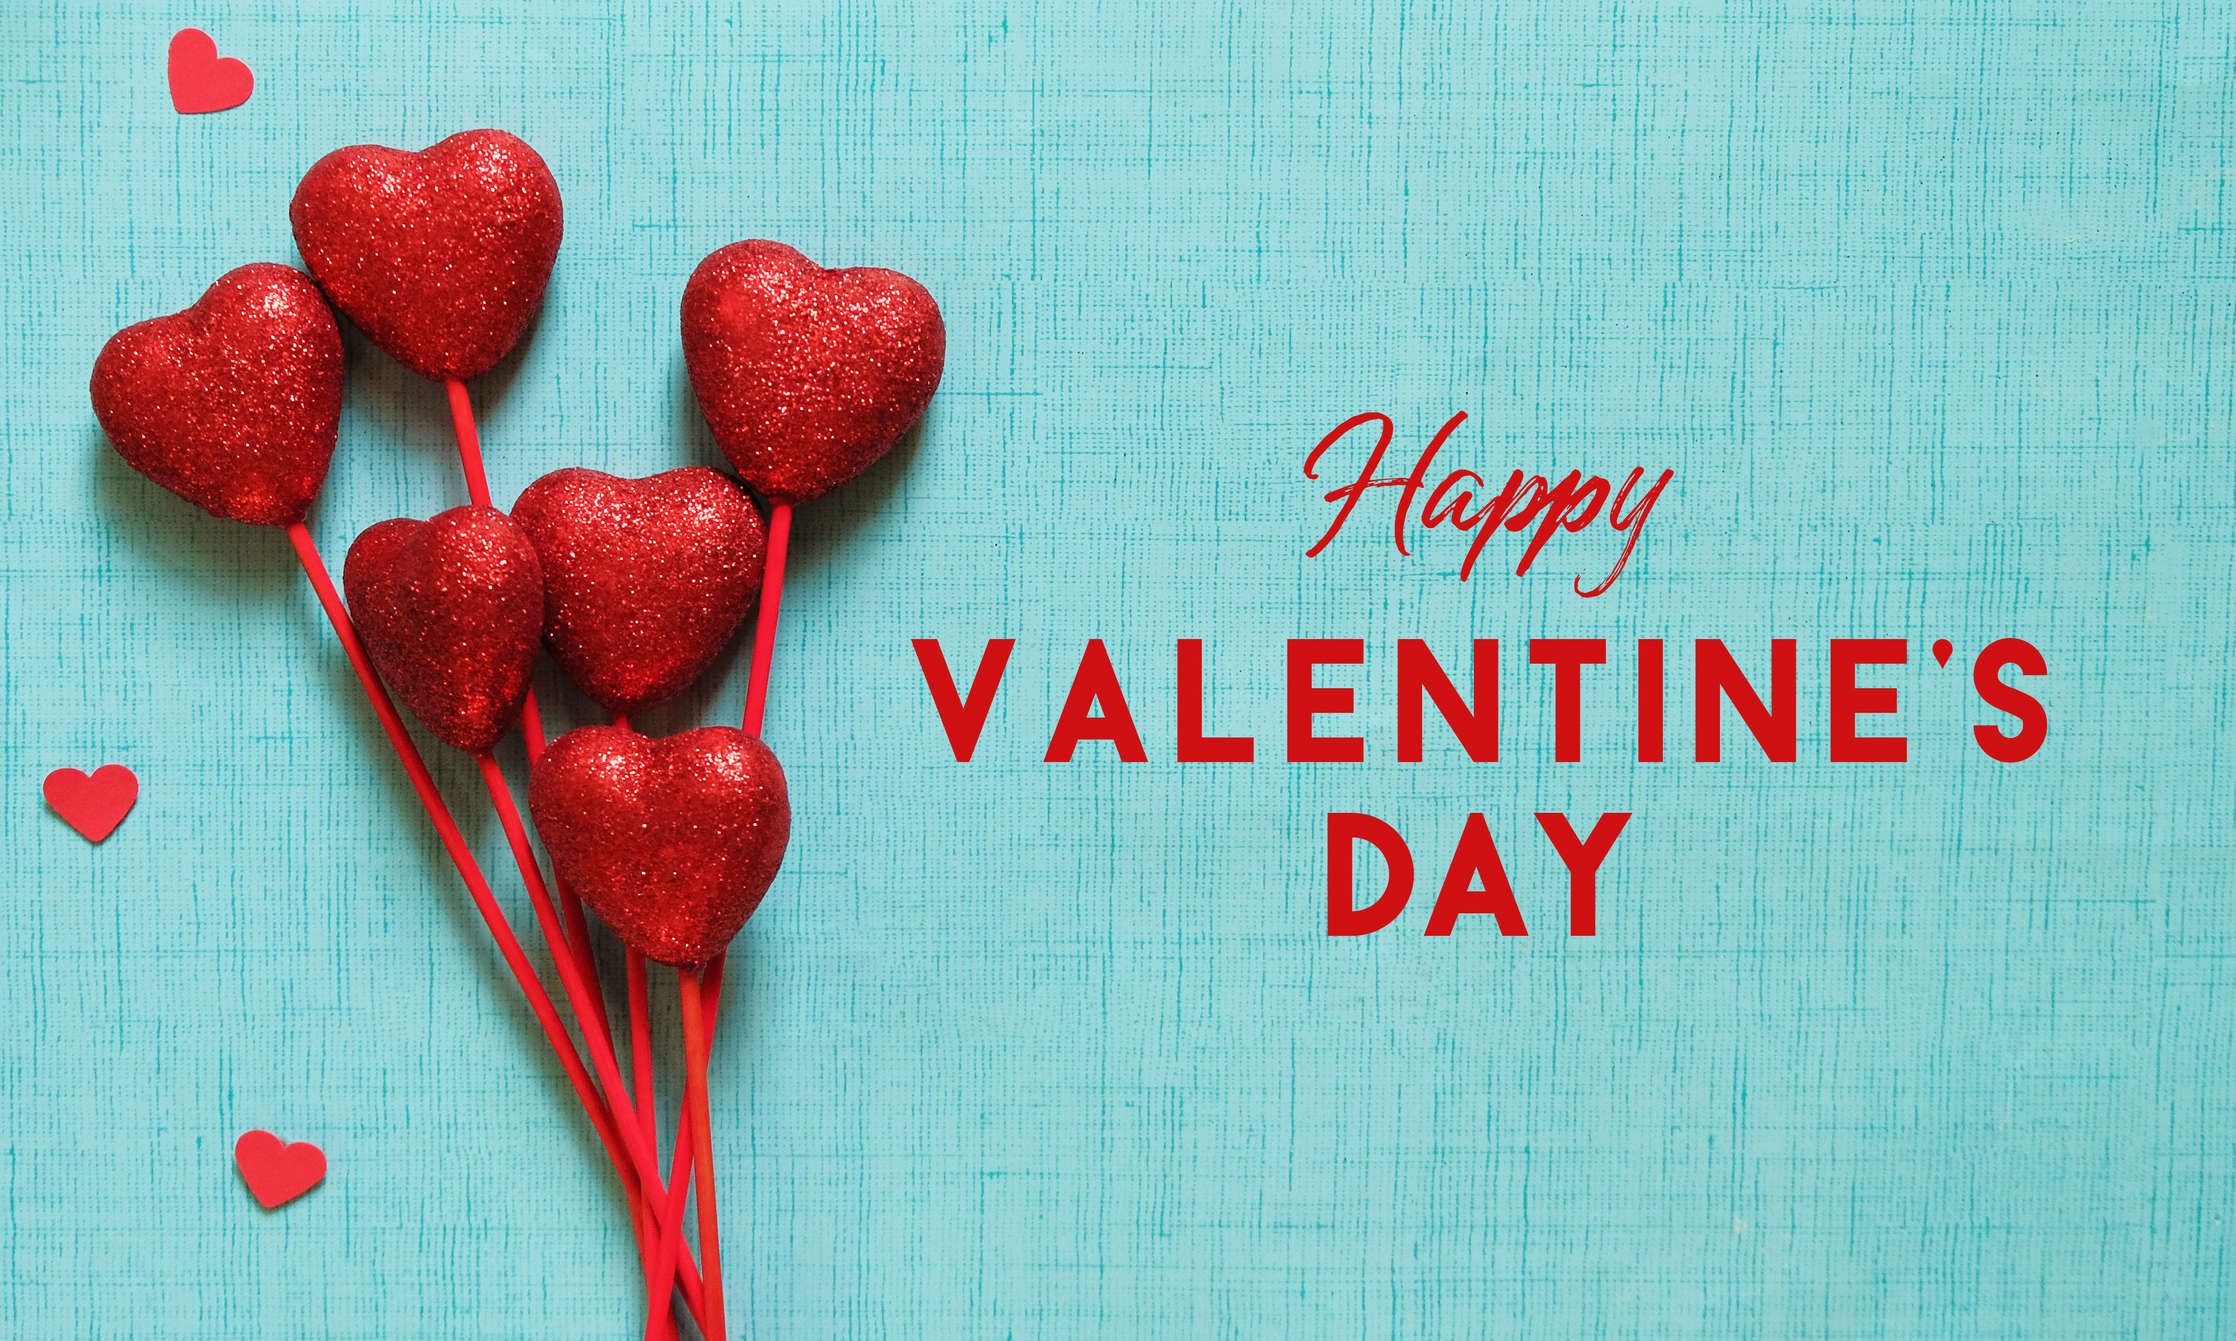 Happy Valentines Day 2021: Image, Quotes, Wishes, Messages, Cards, Greetings, Picture and GIFs of India